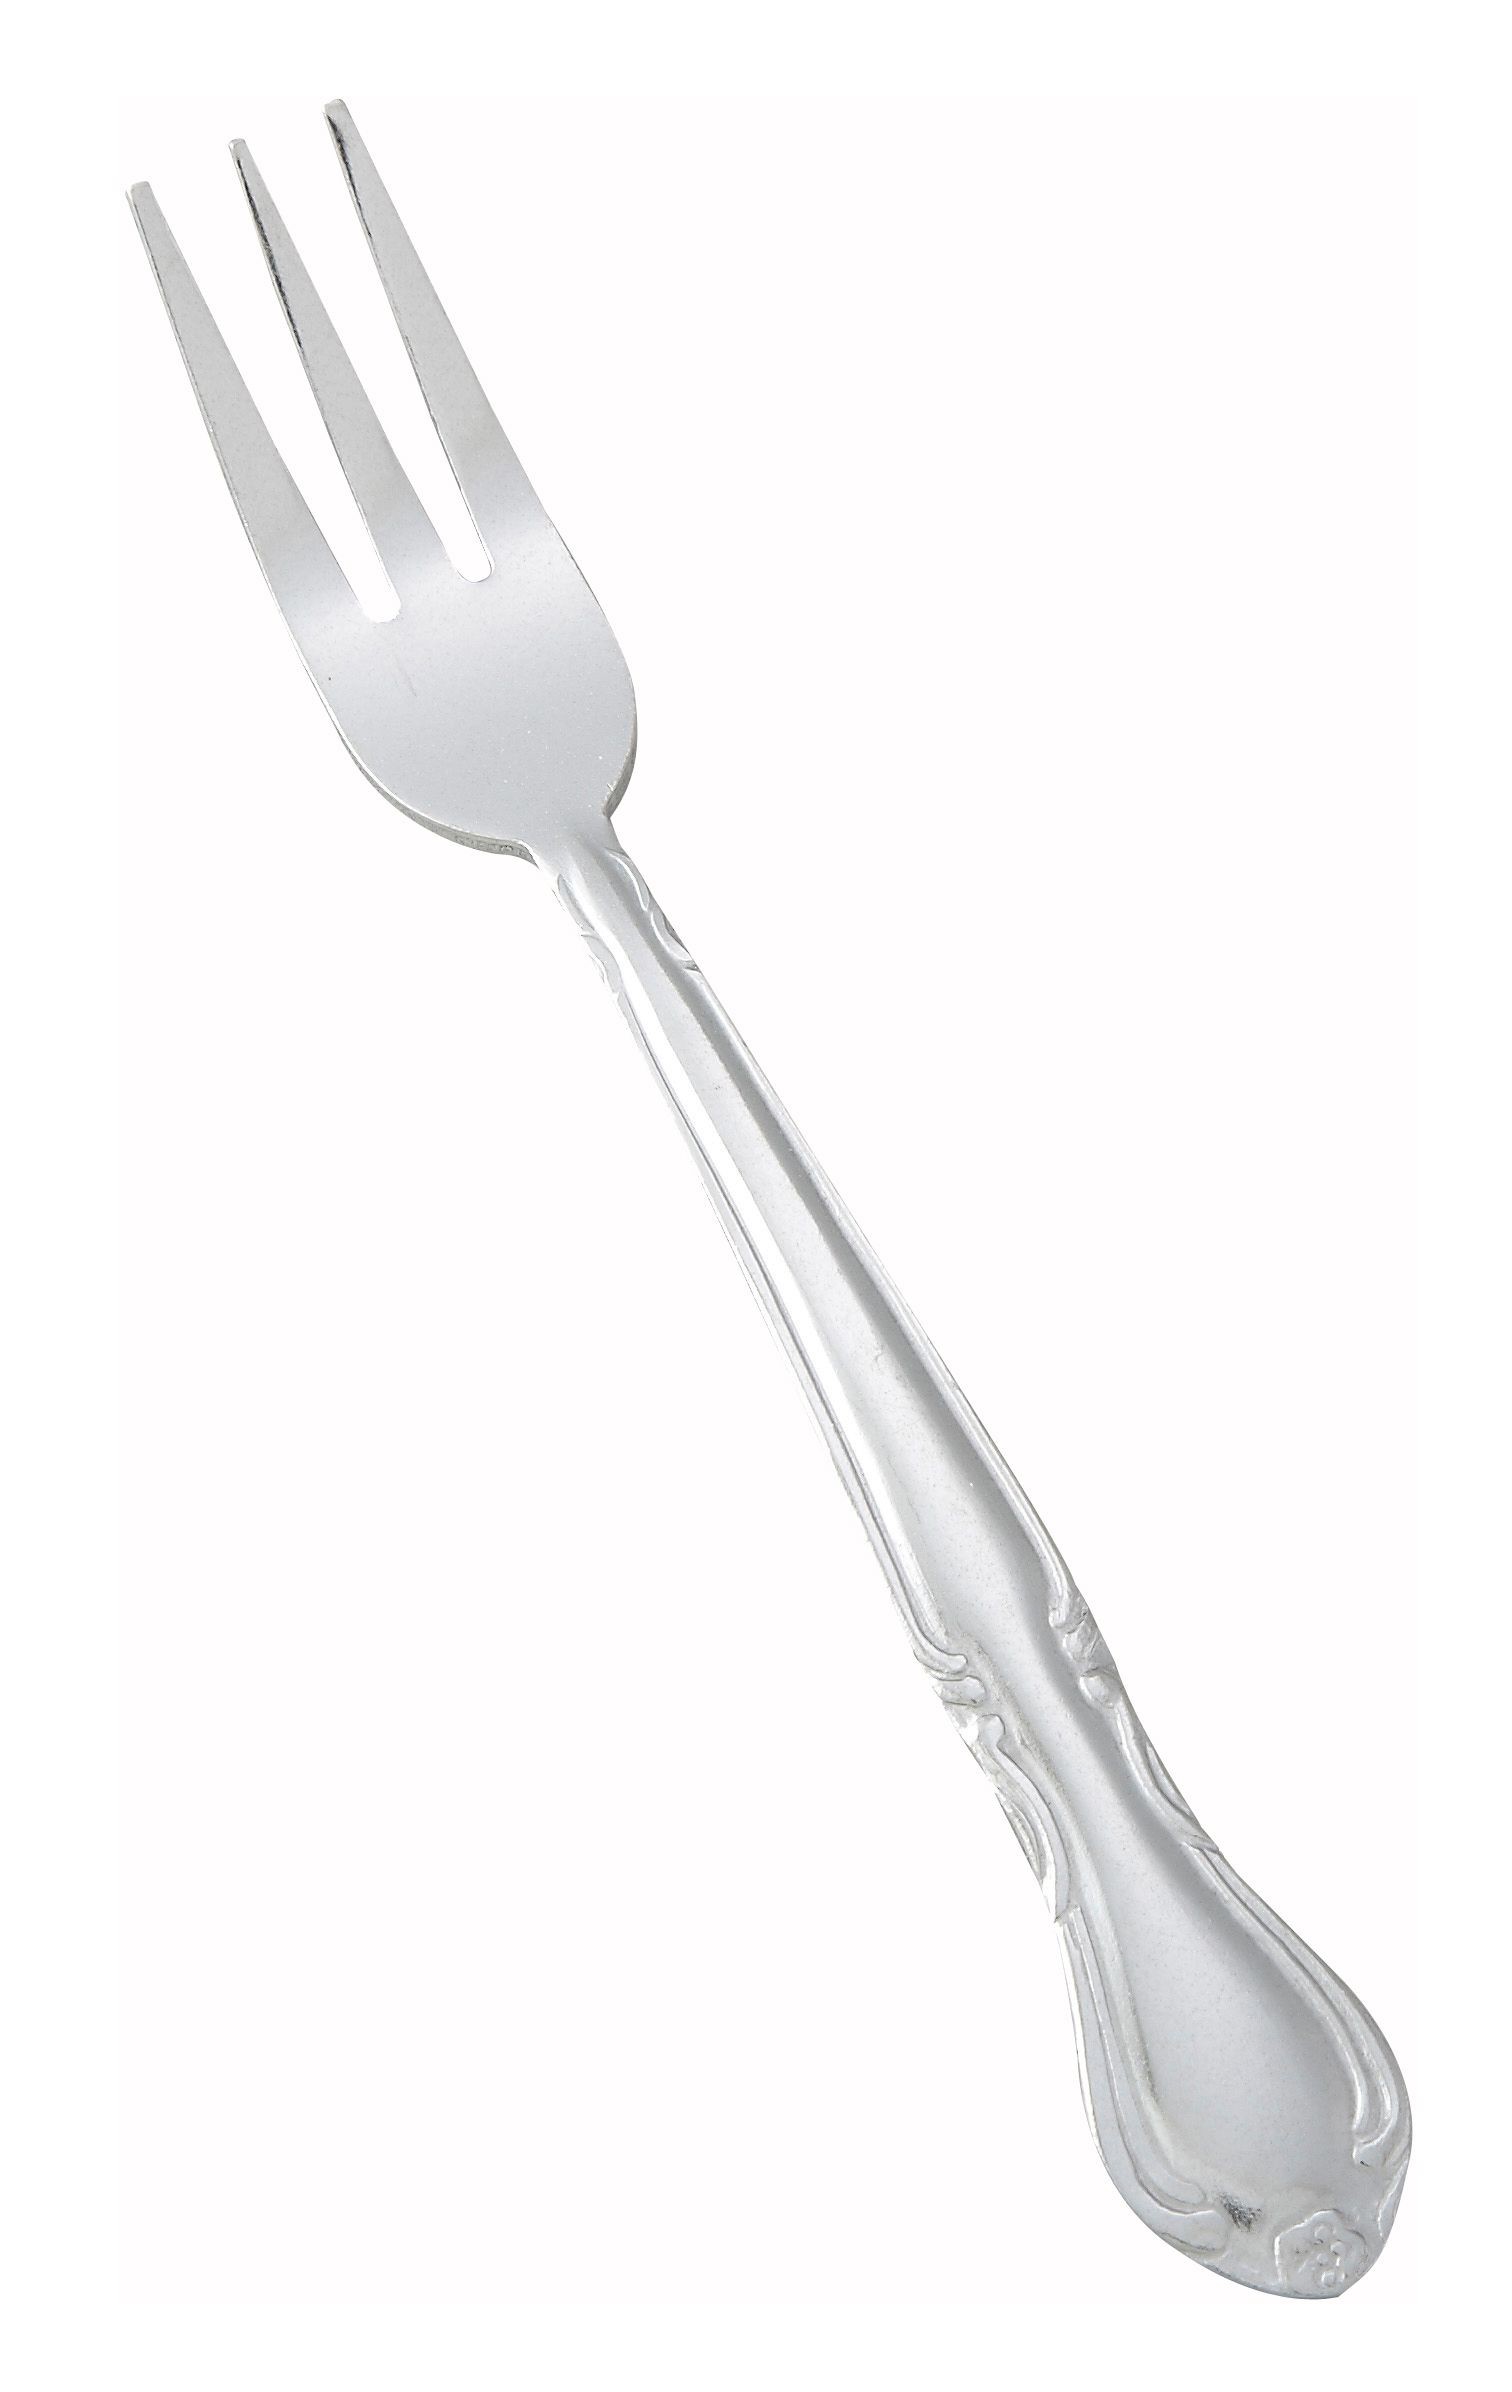 Winco 0004-07 Elegance Heavy Weight Vibro Finish Stainless Steel Oyster Fork (12/Pack)